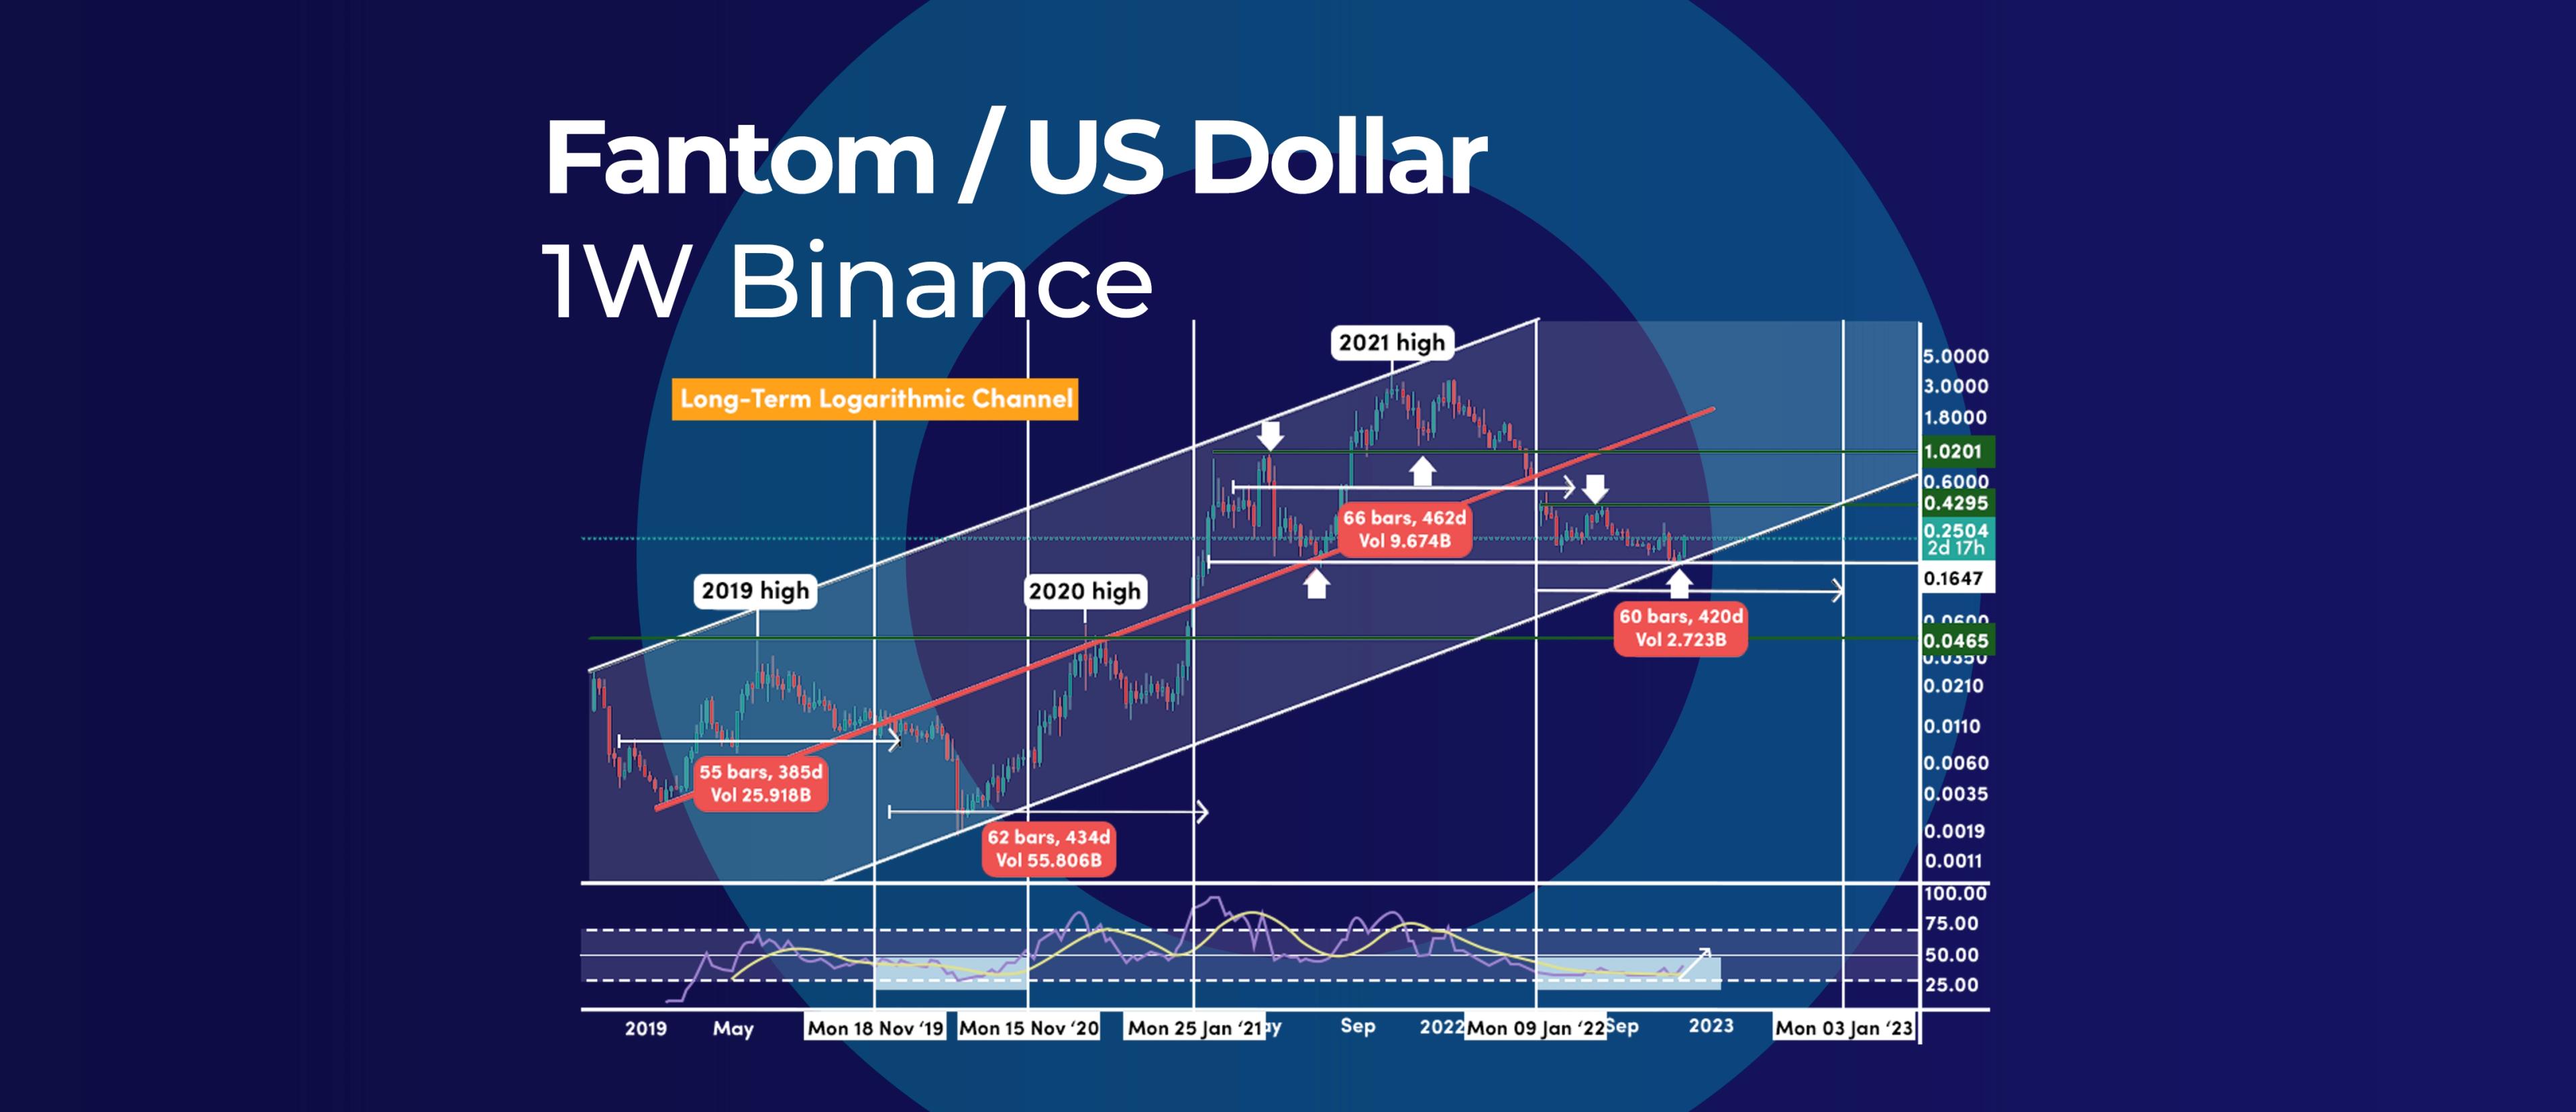 This Logarithmic Chart Shows Fantom at Key Intersection